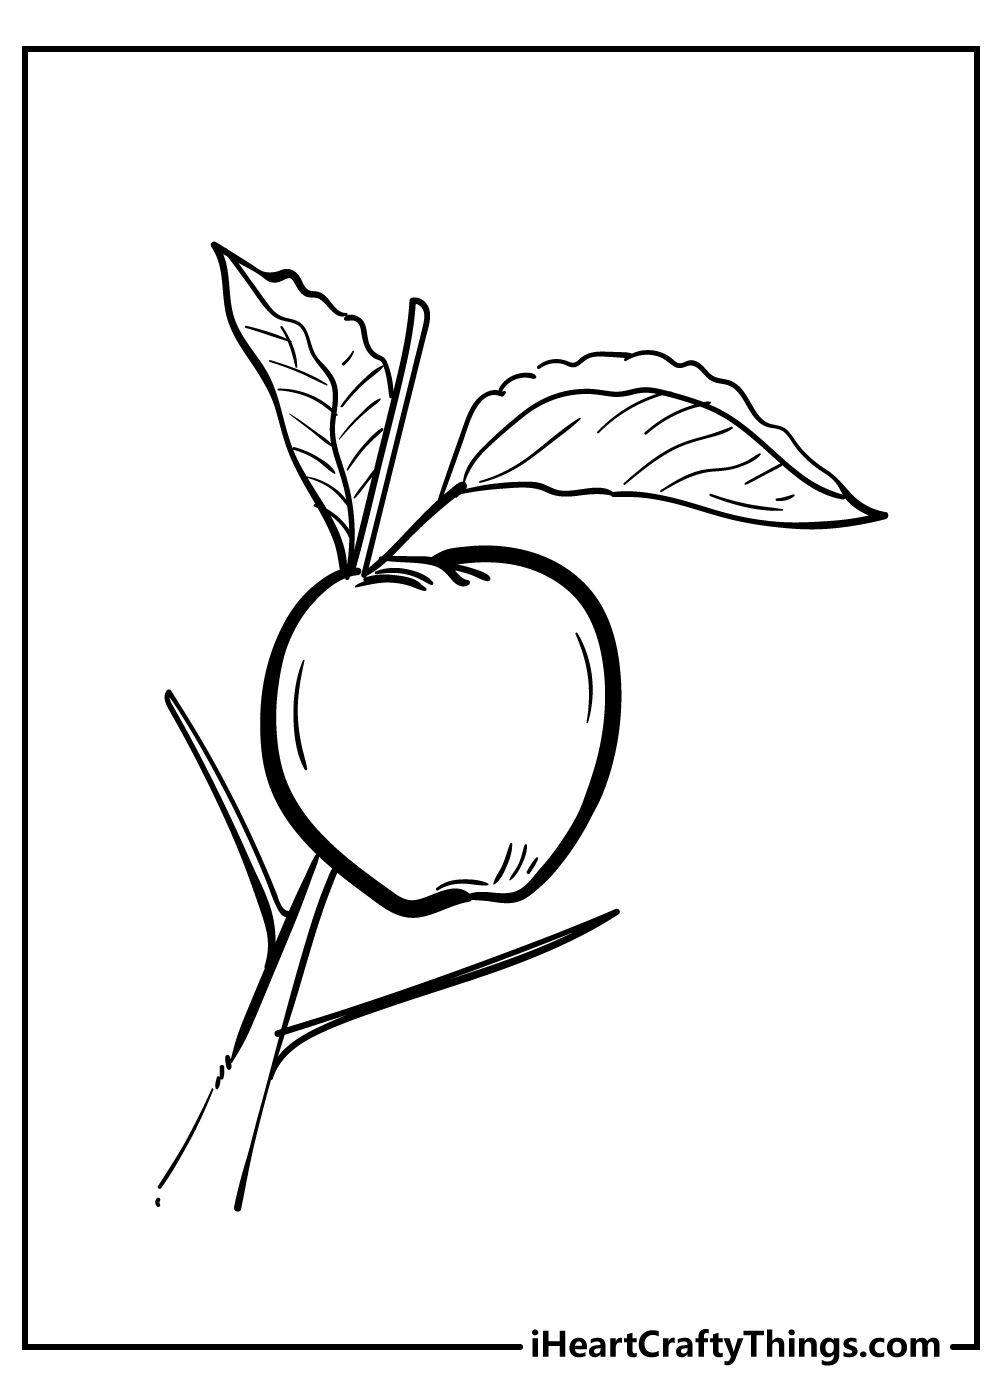 Apple Coloring Pages free download for kids